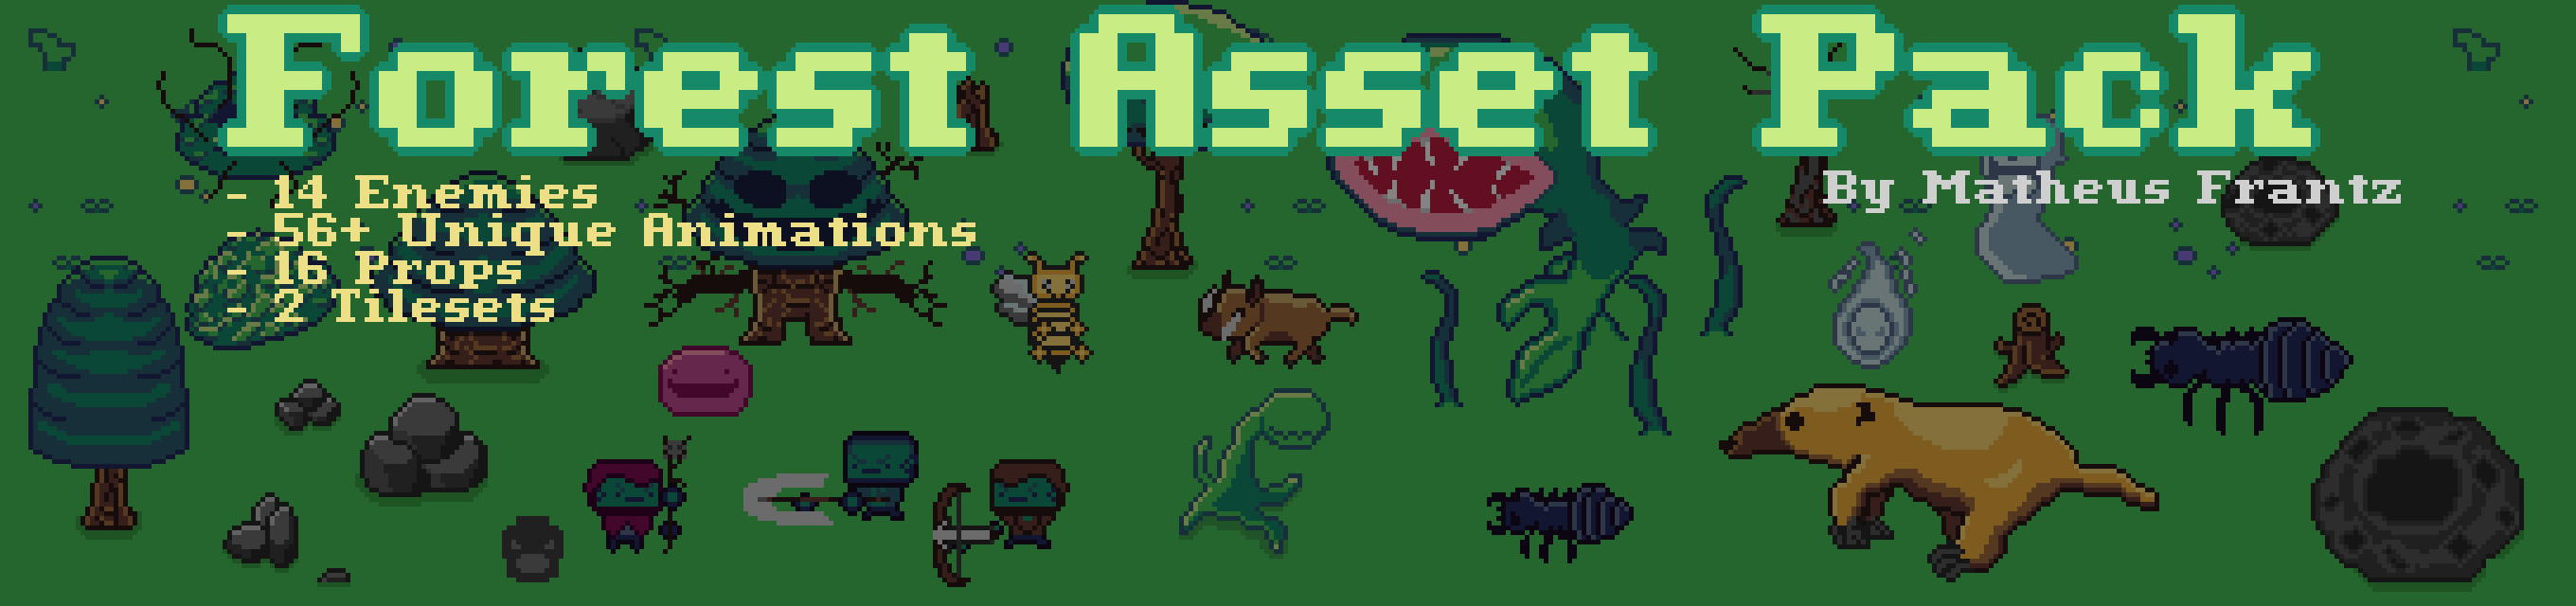 Forest Asset Pack